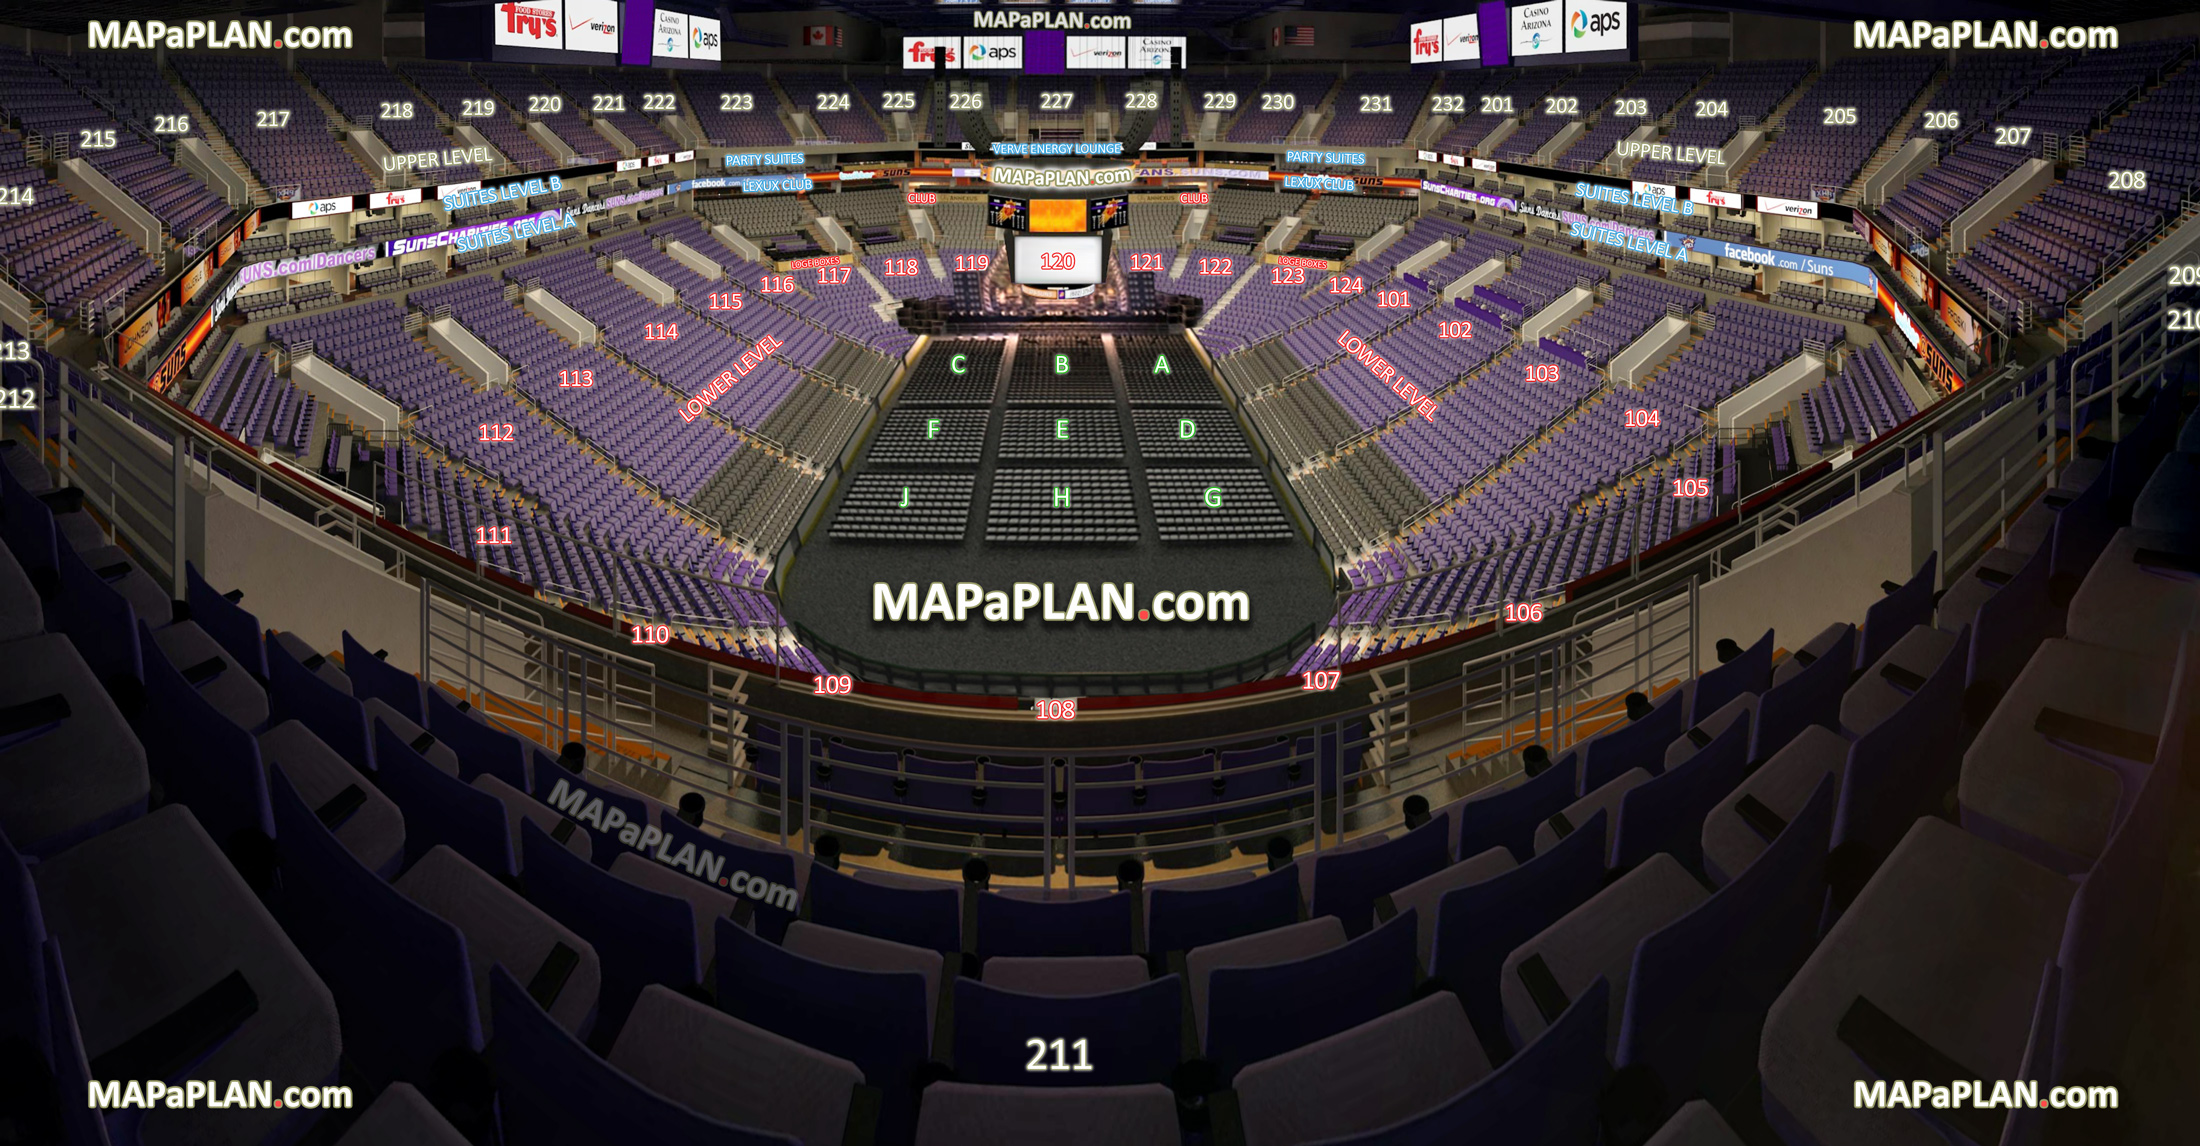 view section 211 row 10 seat 8 virtual venue 3d interactive interior tour inside concert stage picture general admission ga lower upper level suites Phoenix Footprint Center Arena seating chart